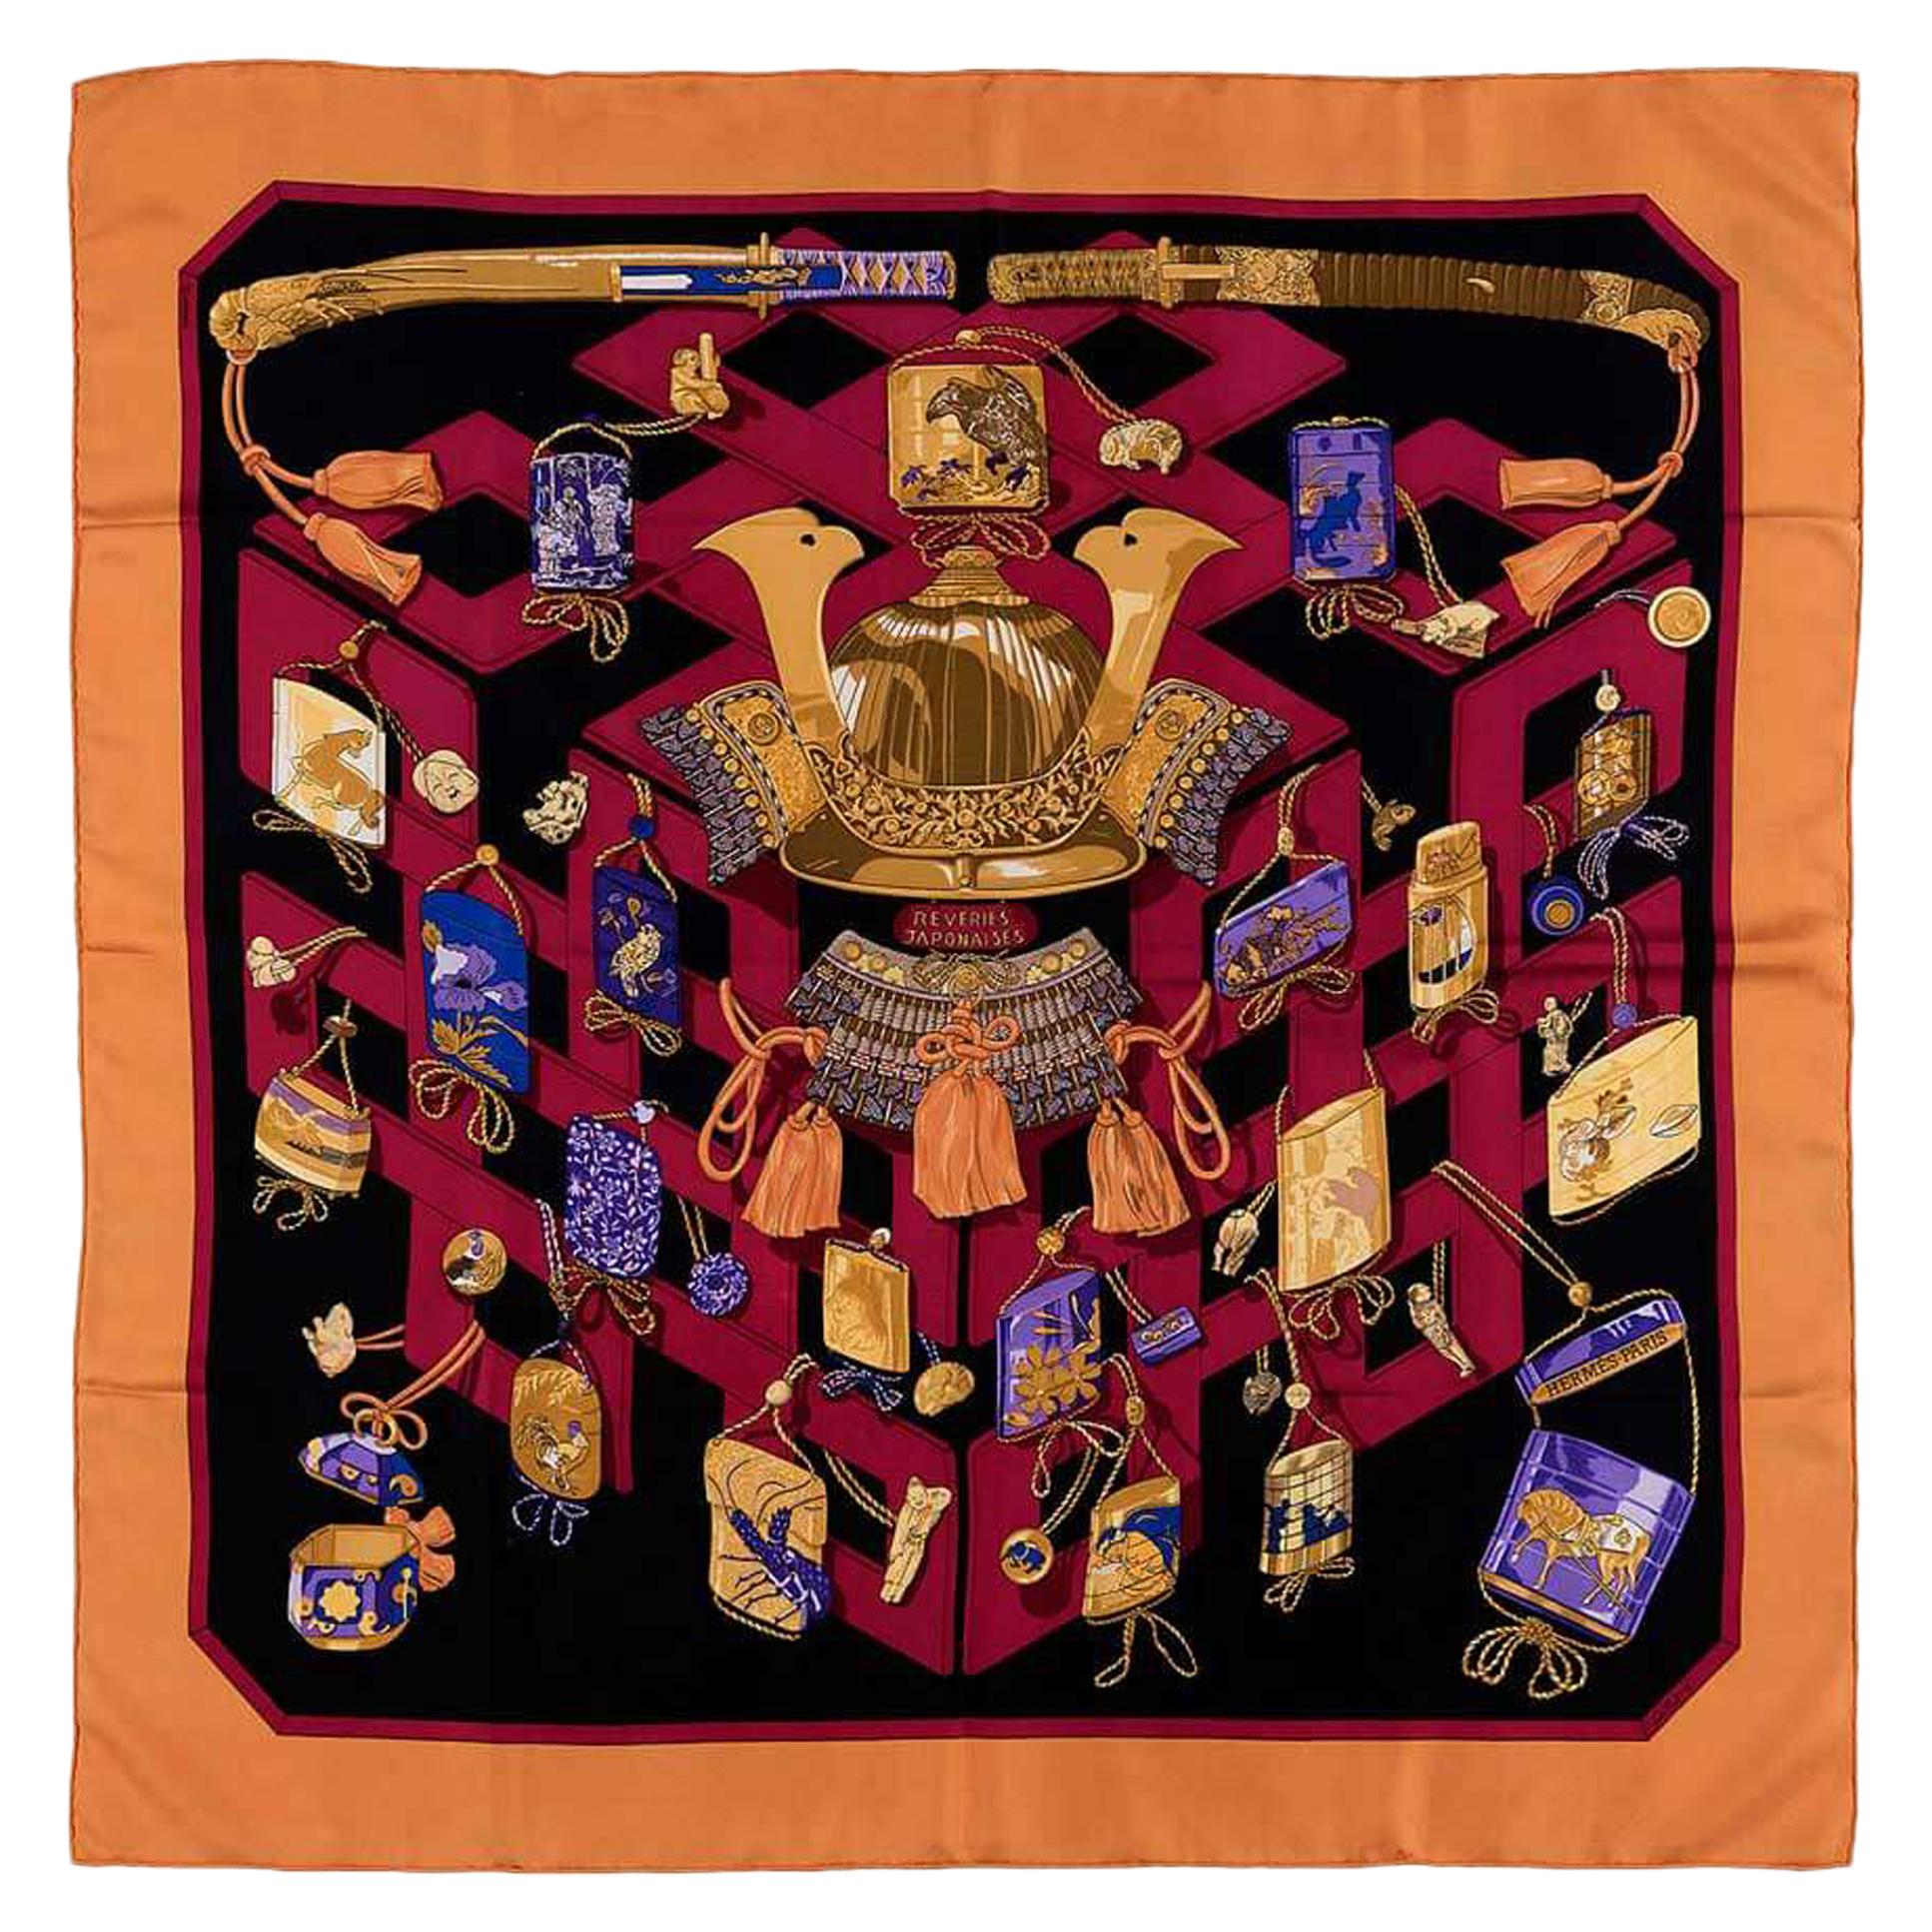 Very Rare Vintage Hermes Silk Scarf 'Reveries Japonaises' by Caty Latham For Sale